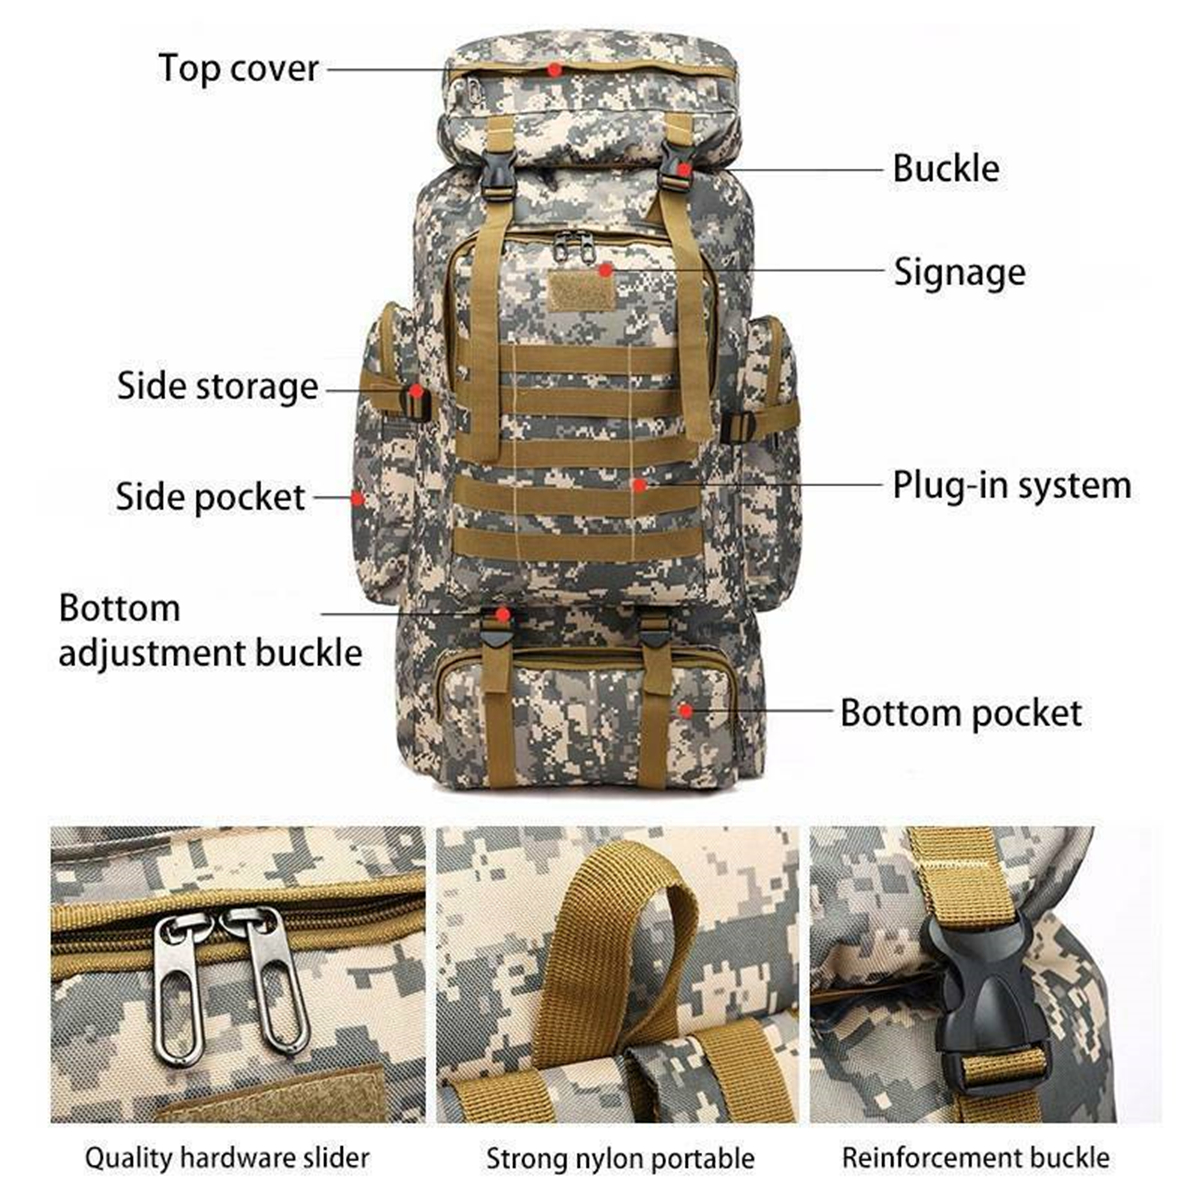 80L-Molle-Tactical-Bag-Outdoor-Traveling-Camping-Hiking-Military-Rucksacks-Backpack-Camouflage-Bag-1556947-3